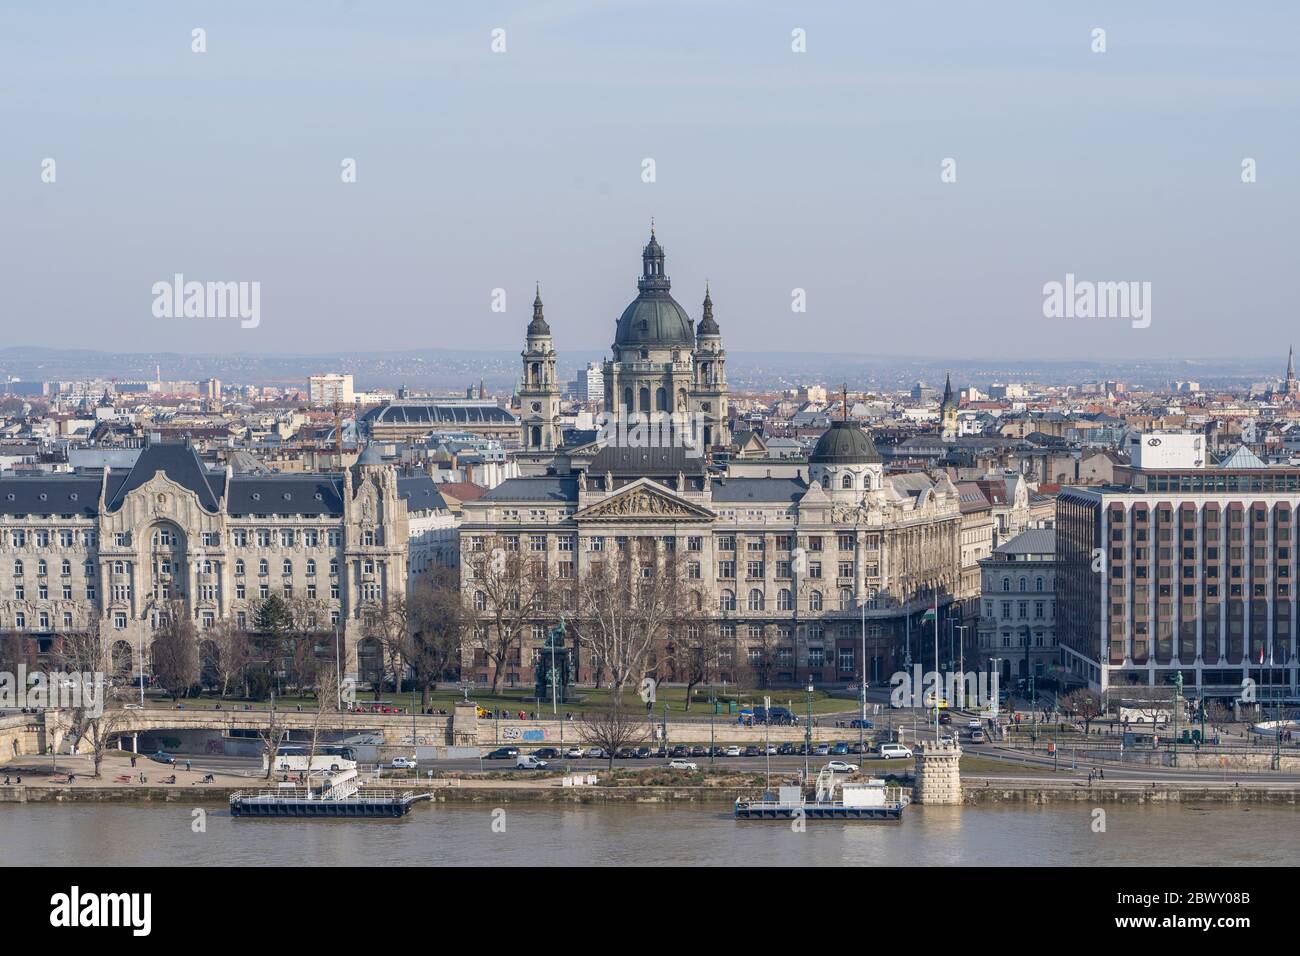 Gresham Palace with St. Stephen's Basilica on Danube riverside in Budapest winter morning Stock Photo